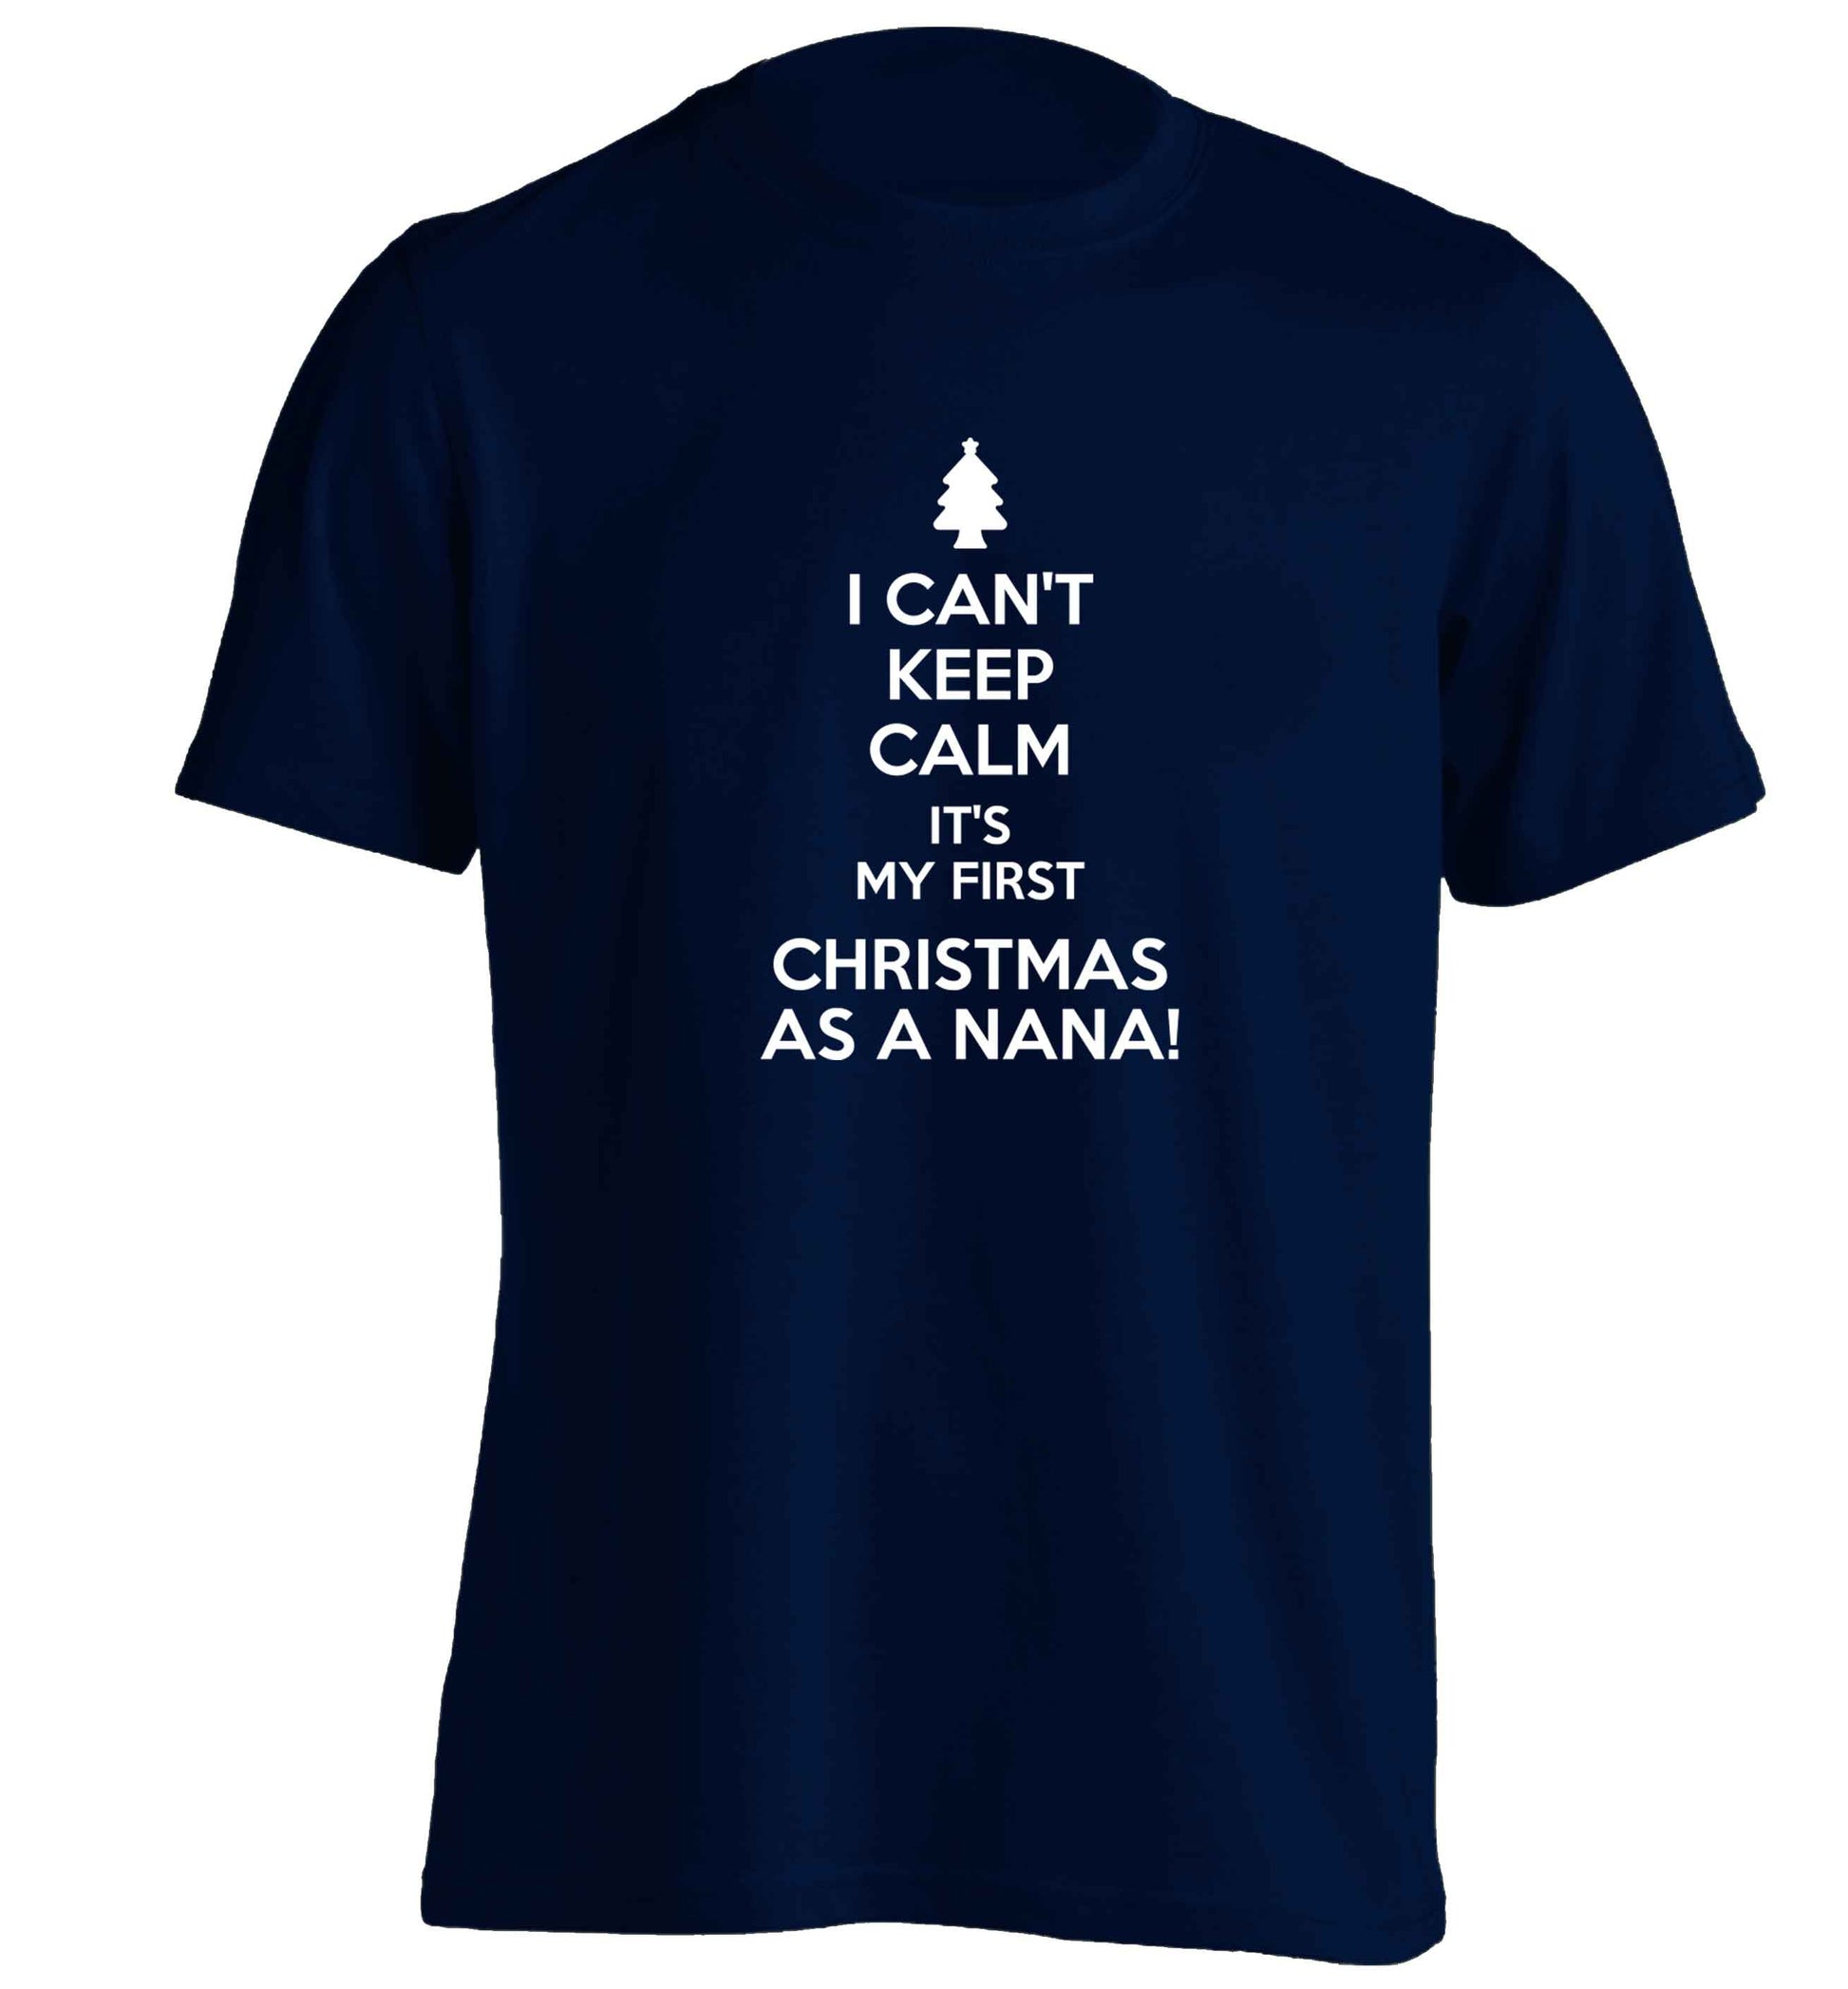 I can't keep calm it's my first Christmas as a nana! adults unisex navy Tshirt 2XL